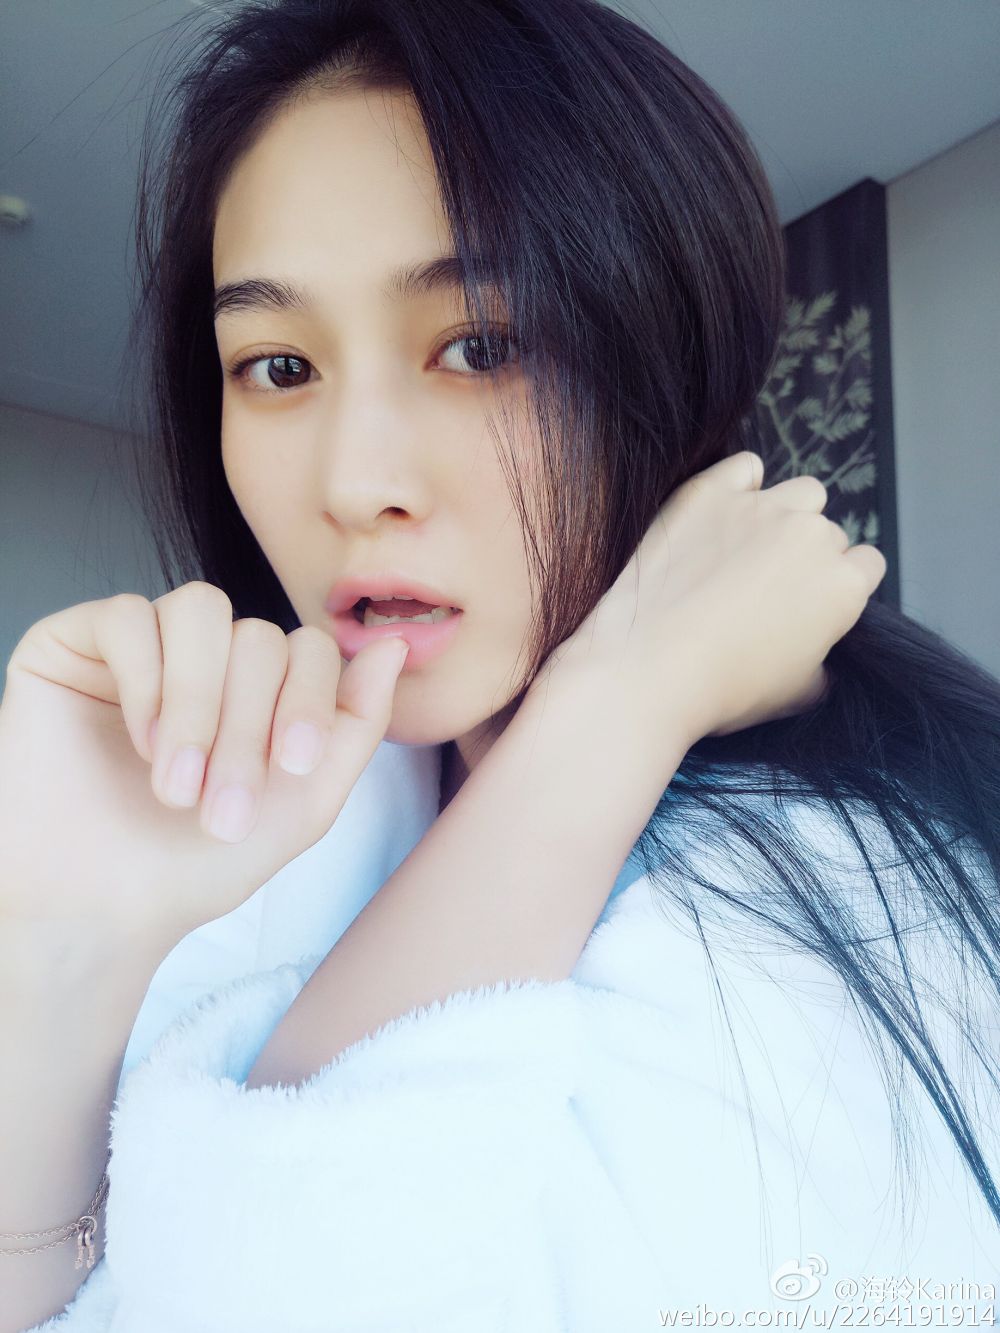 Ling Hai Sexy and Hottest Photos , Latest Pics